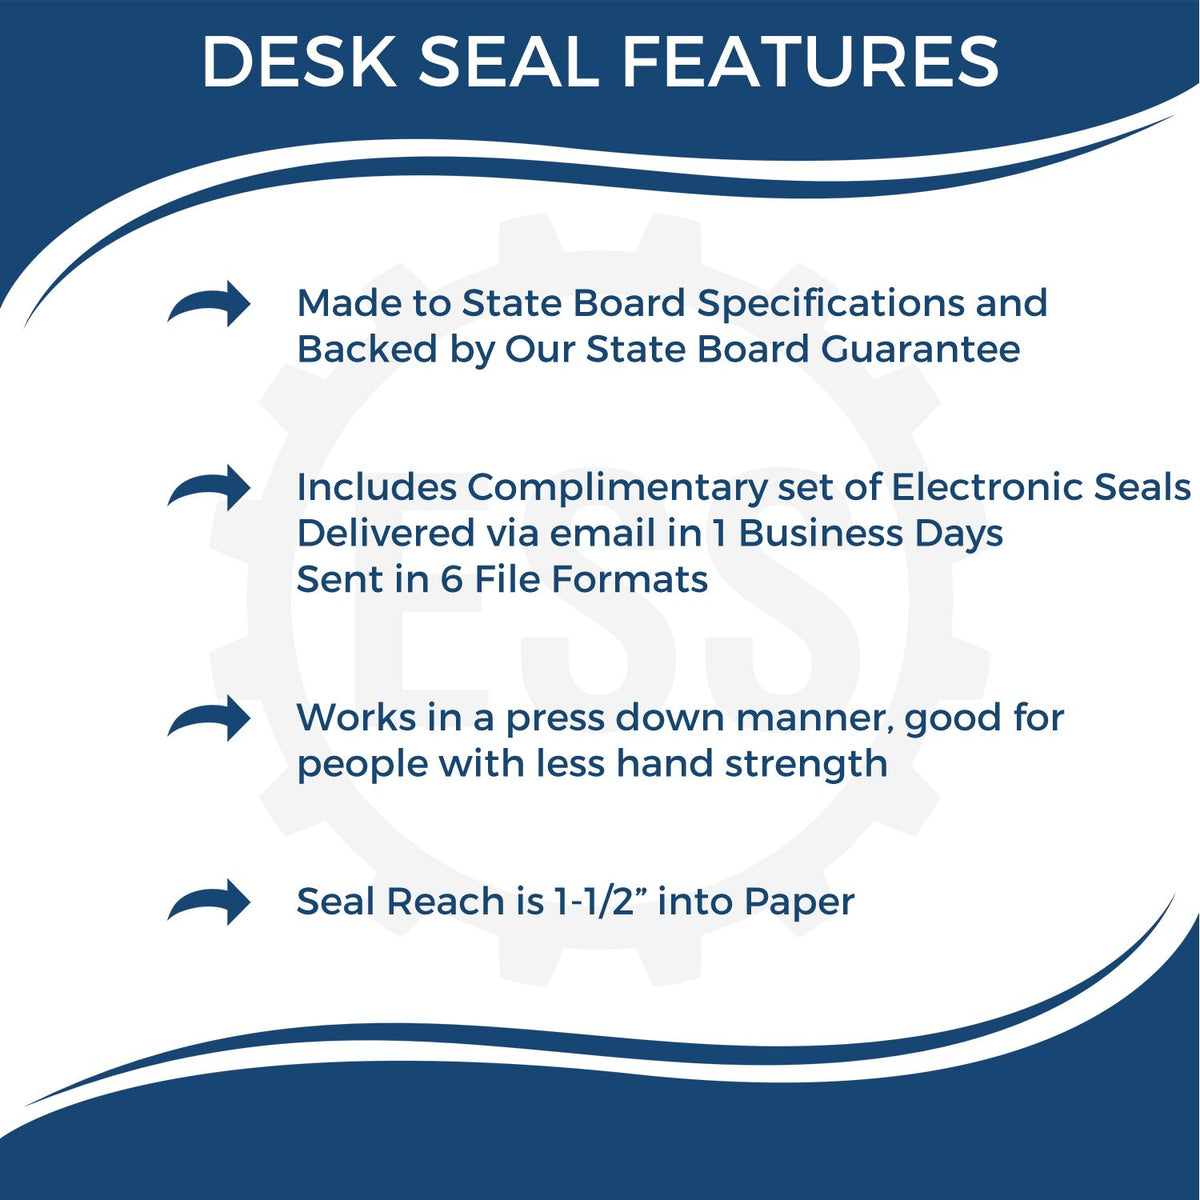 A picture of an infographic highlighting the selling points for the Kentucky Geologist Desk Seal